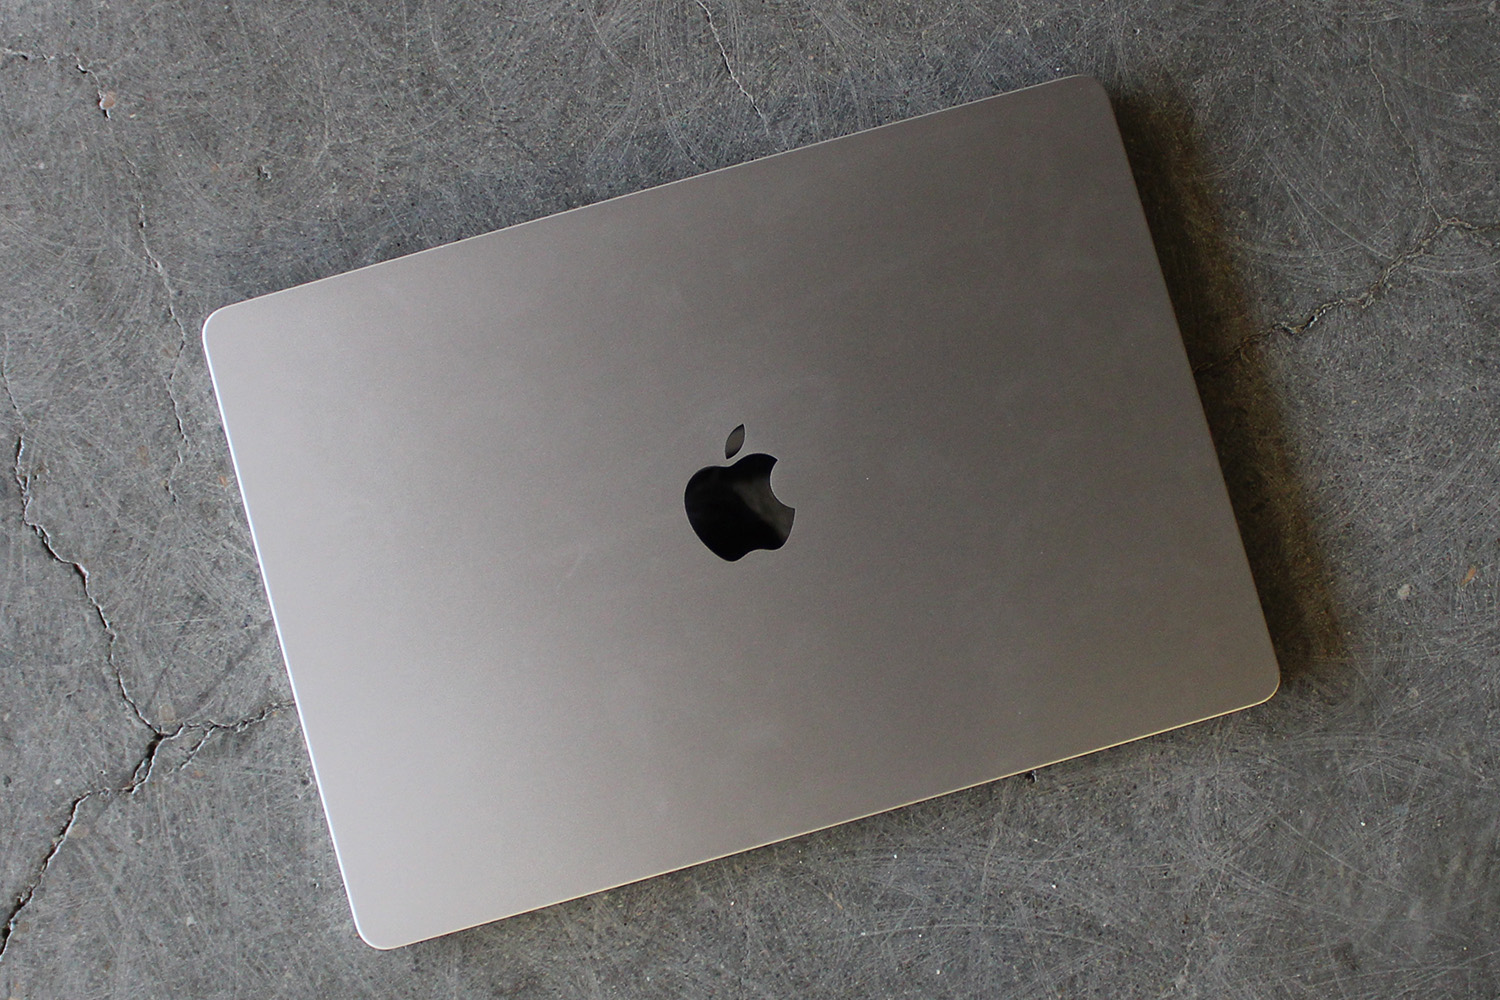 The lid of Apple's 15-inch MacBook Air seem from above.